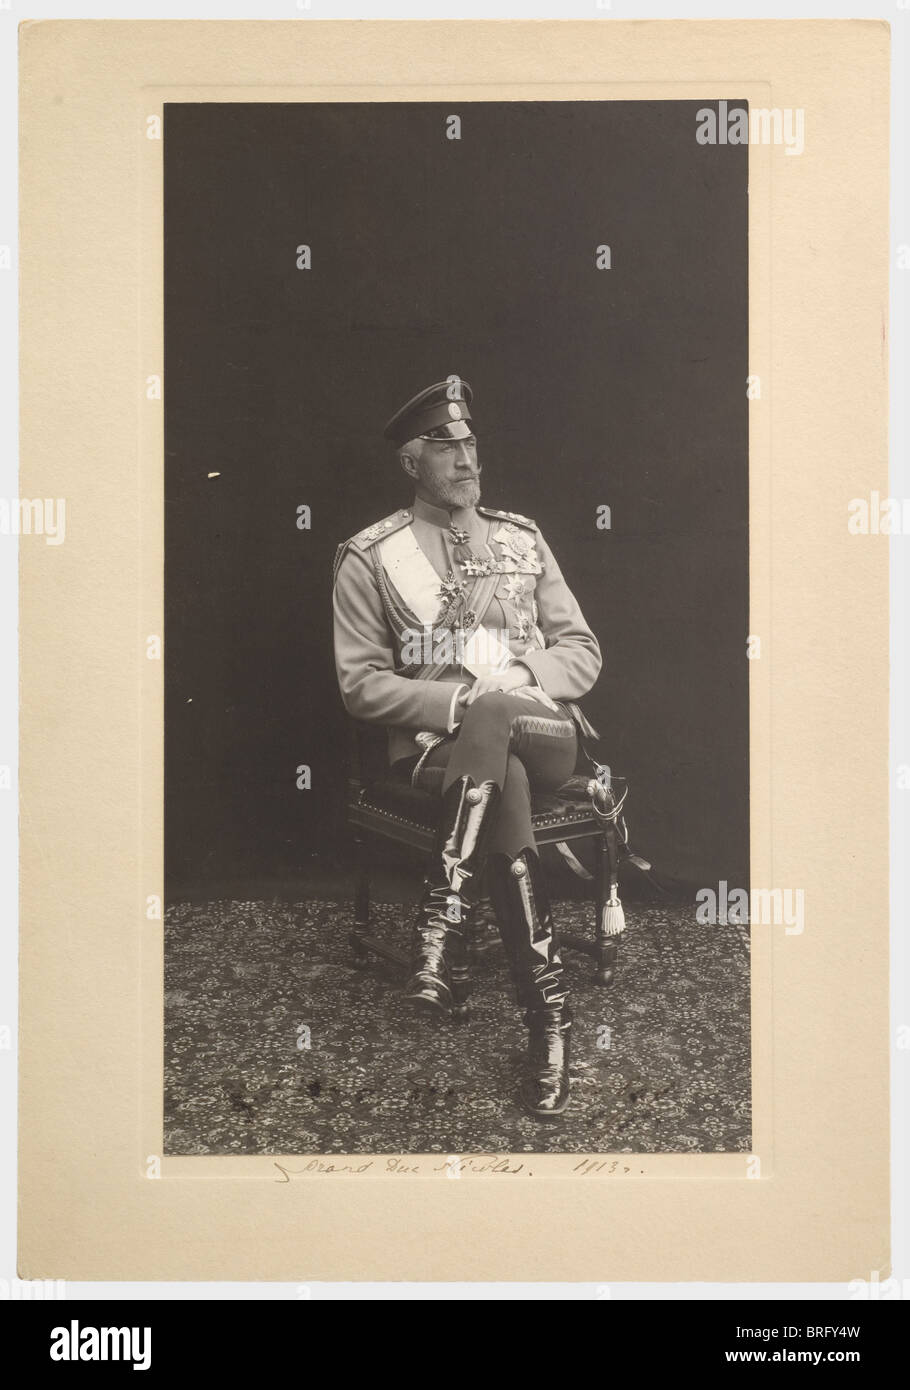 Grand Duke Nikolai Nikolaievitch (1856 - 1929), a large-format, signed portrait photograph of the Commander in Chief of the Russian Army, 1913 The Grand Duke in uniform with medals, picture (barely illegible) and passepartout signed and dated 'Grand duc Nicolas. 1913'. Picture taken by court photographer K.E. von Gan & Co., Tsarskoye Selo. Picture size 27.5 x 15 cm. Overall size 33 x 23 cm. Extremely well preserved., people, 1910s, 20th century, object, objects, stills, clipping, clippings, cut out, cut-out, cut-outs, man, men, male, Stock Photo